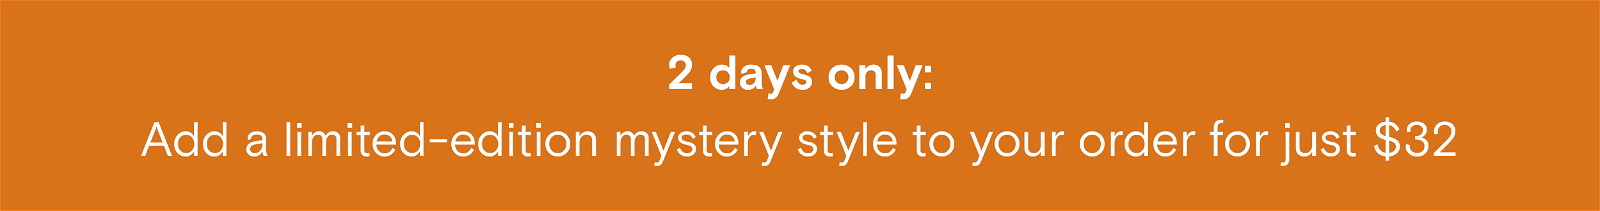 Add a limited-edition mystery style to your order for $32